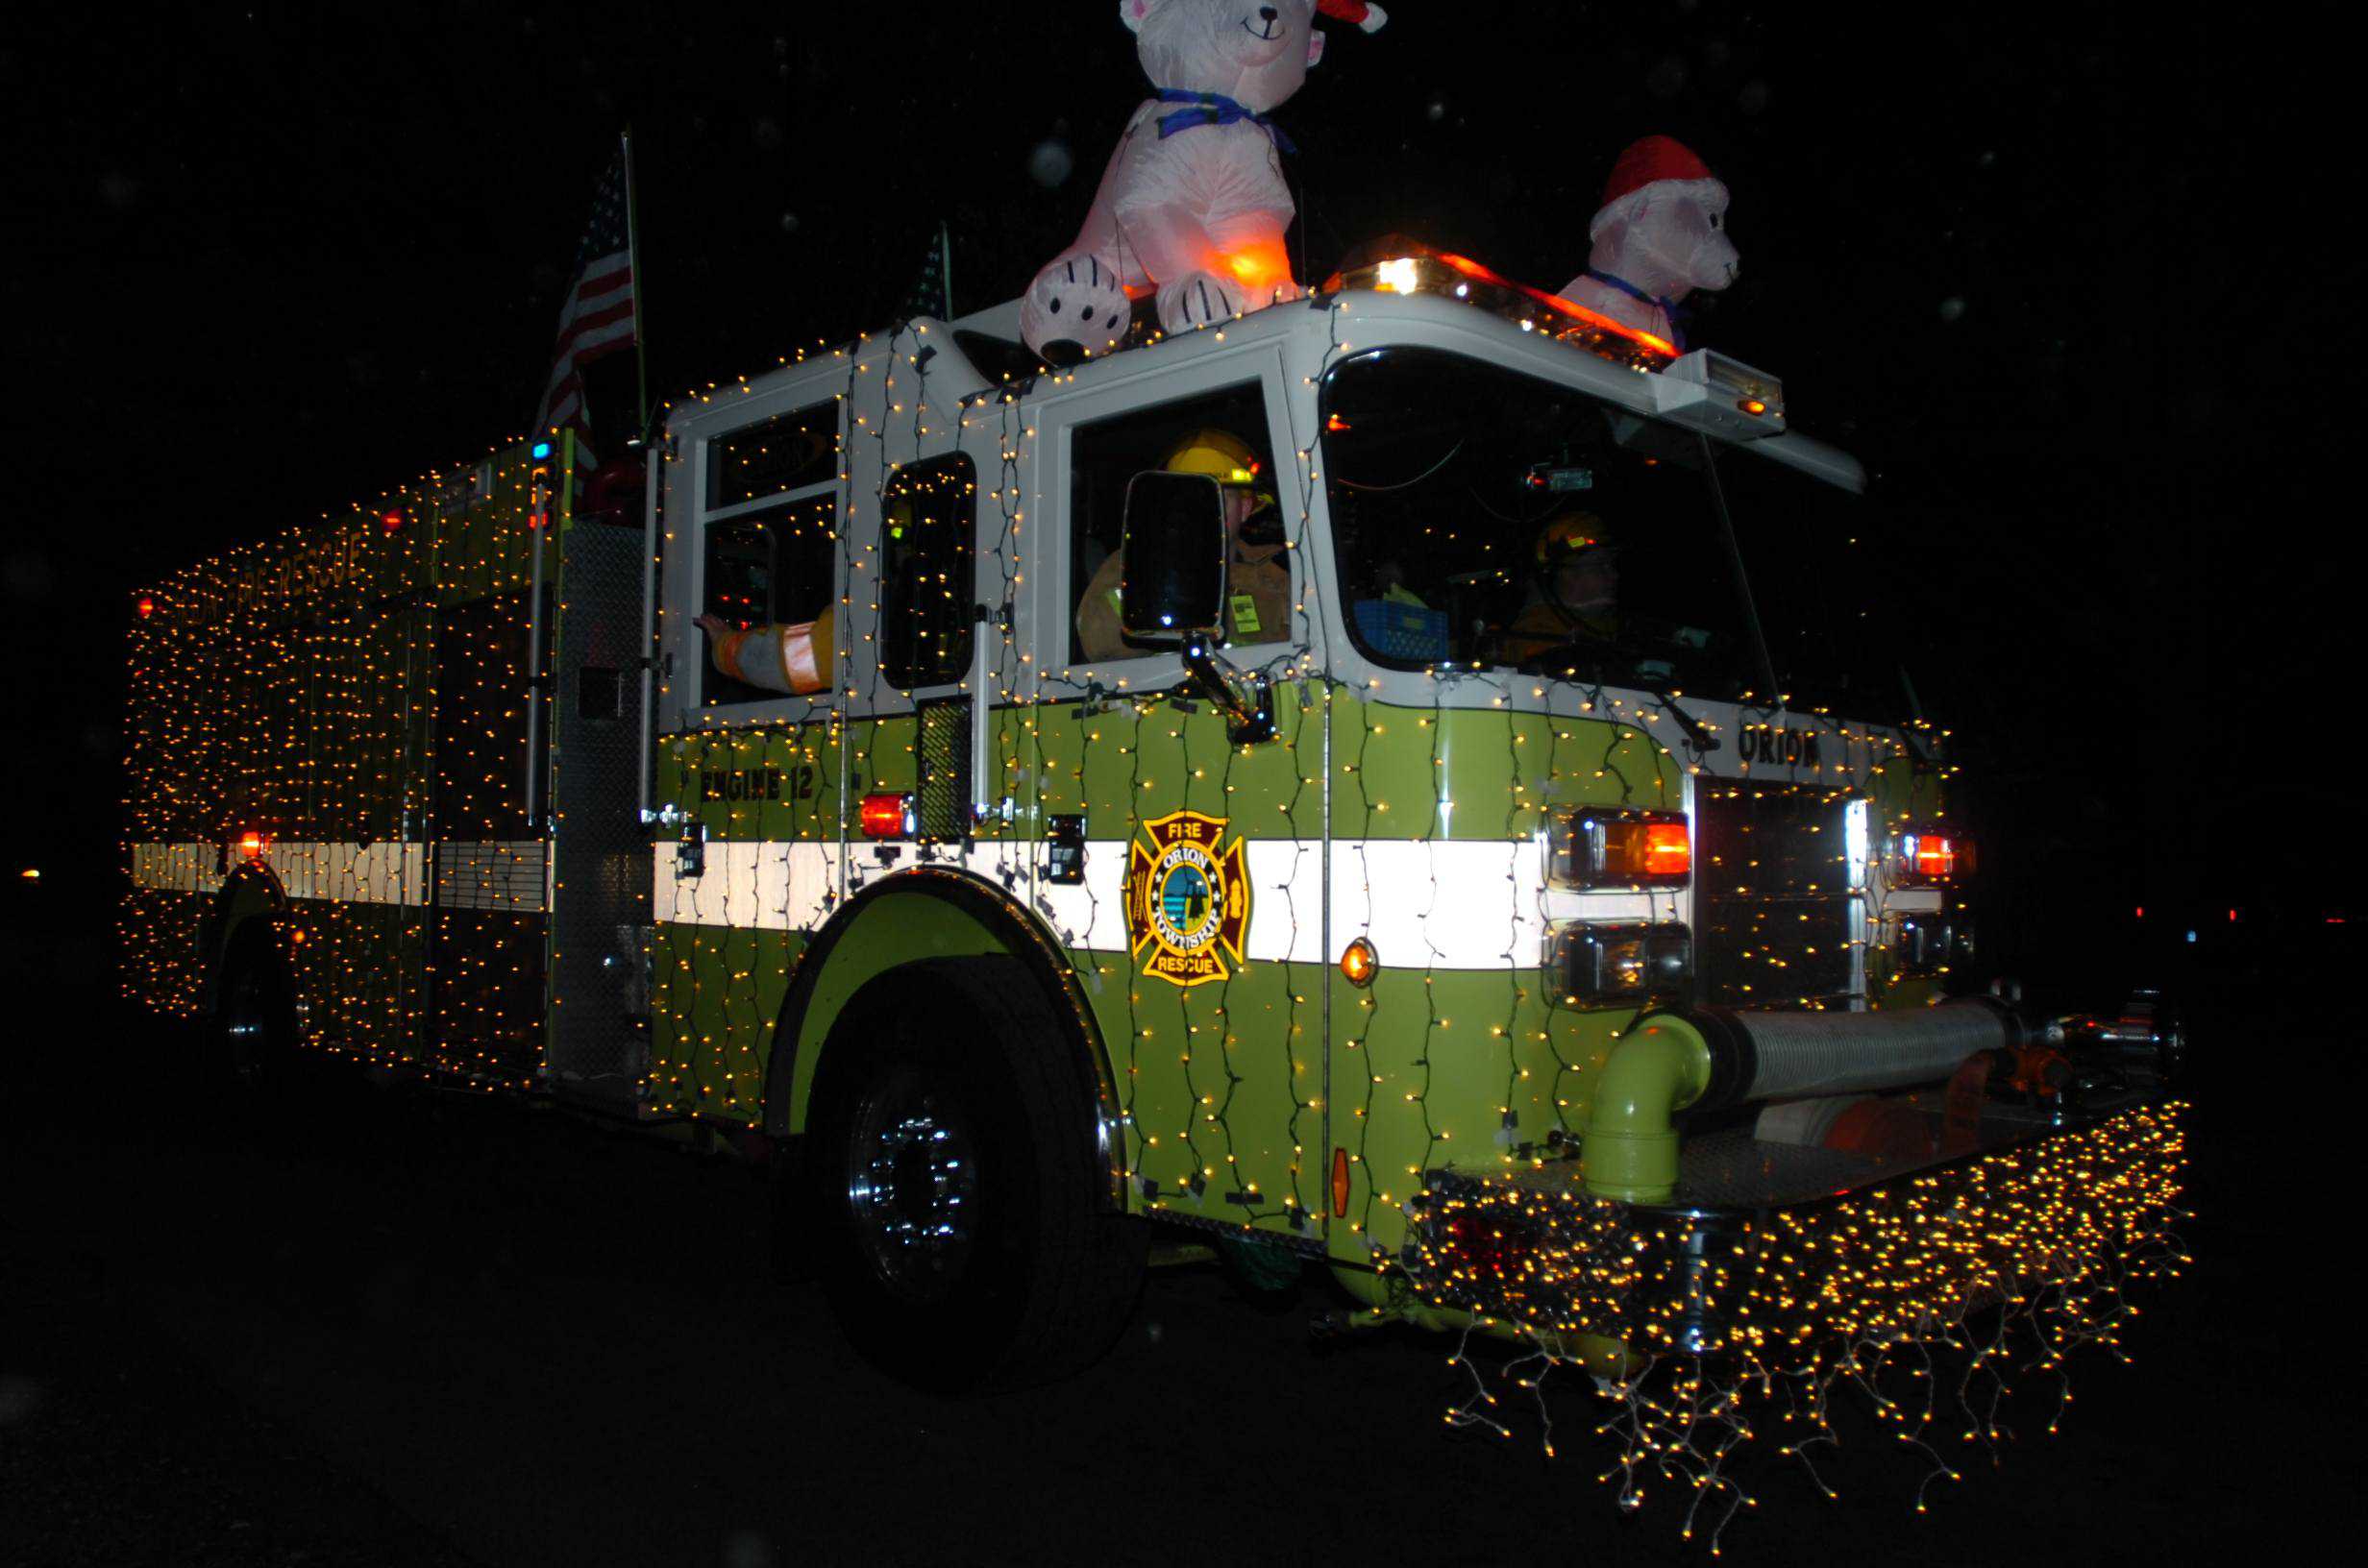 Orion Fire Department Fire Truck dressed in lights for the Annual Holiday Lighted Parade in Lake Orion.